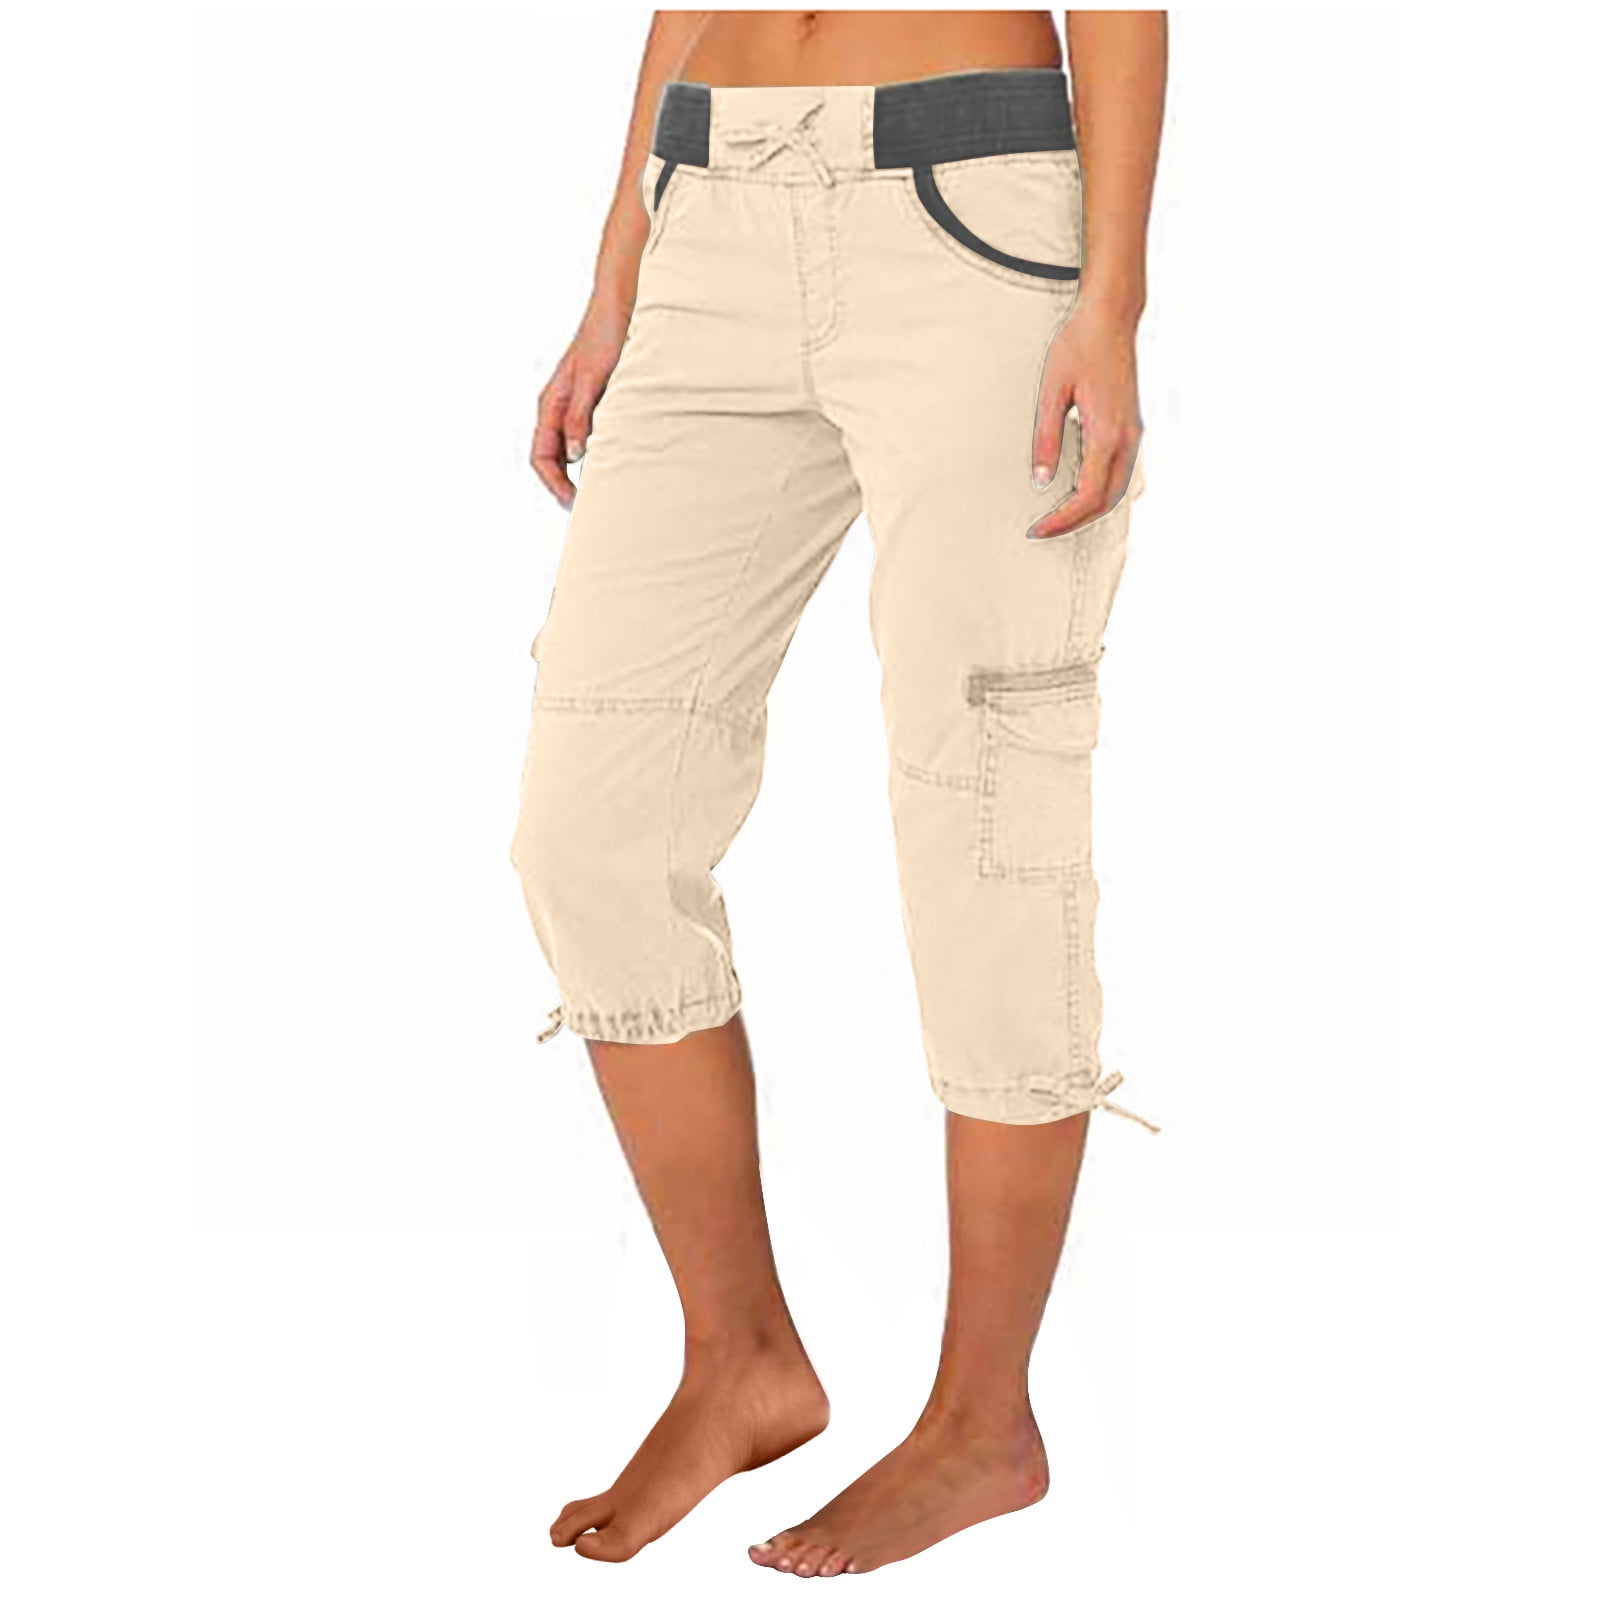 Dyegold Capri Cargo Pants For Women High Waist Casual Loose Fit Work Capris  Lightweight Quick Dry Hiking Joggers Crop Pants 